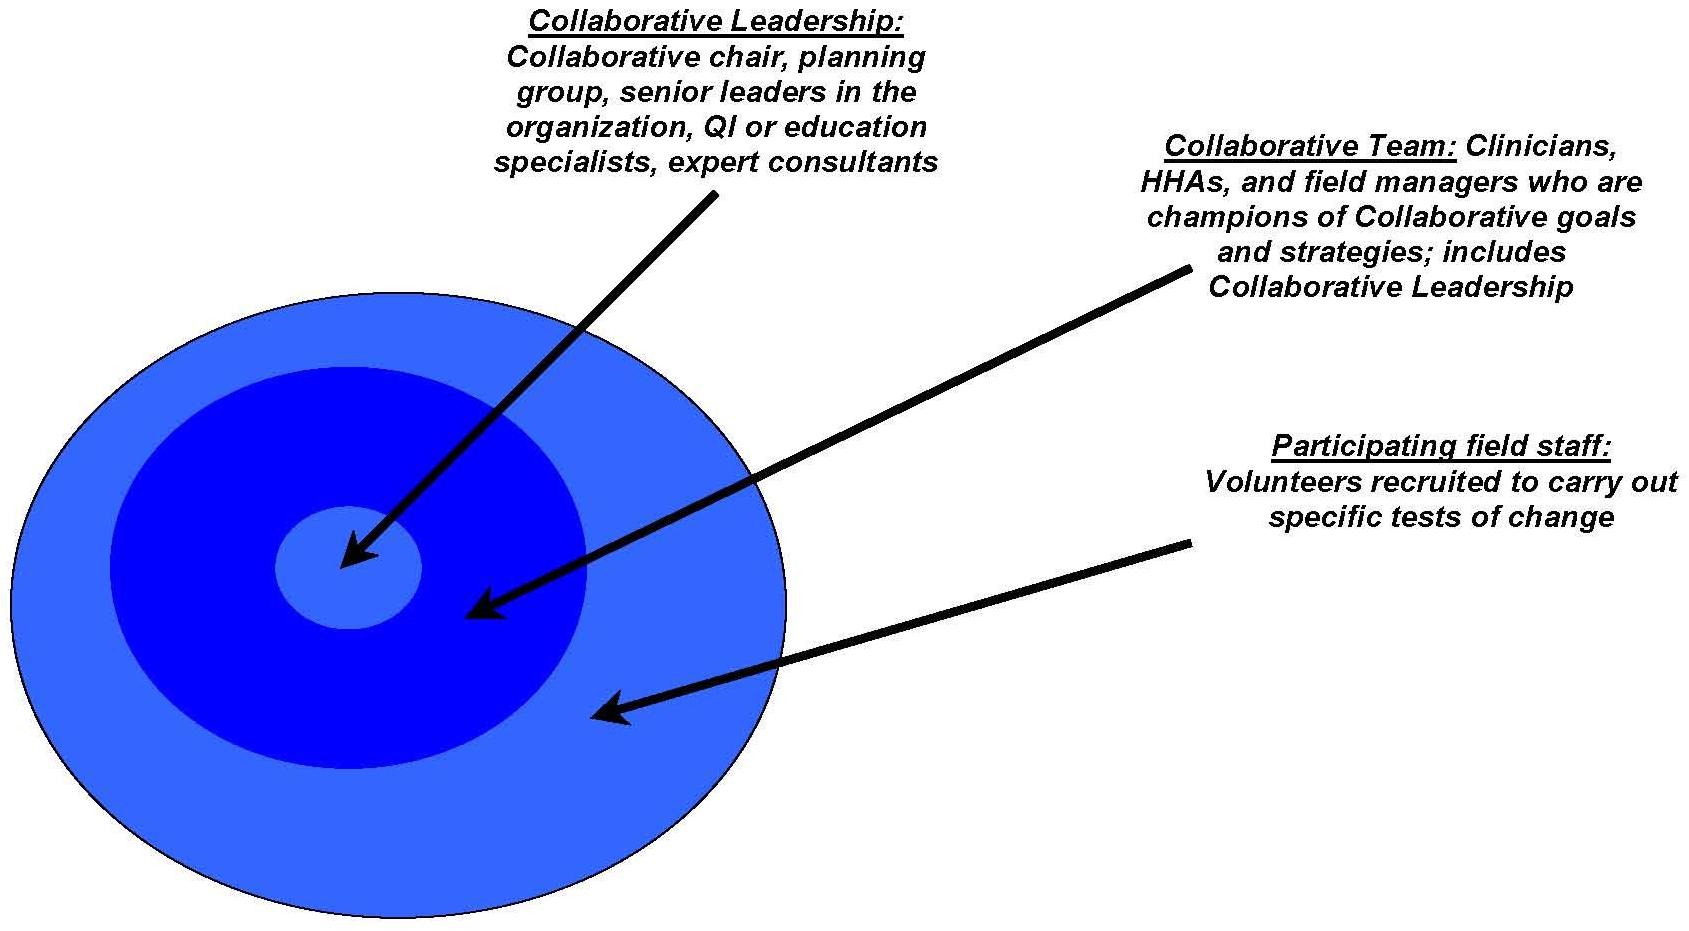 Circle Chart: INNER CIRCLE: Collaborative Leadership -- Collaborative chair, planning group, senior leaders in the organization, QI or education specialists, expert consultants. MIDDLE CIRCLE: Collaborative Team -- Clinicians, HHAs, and field managers who 